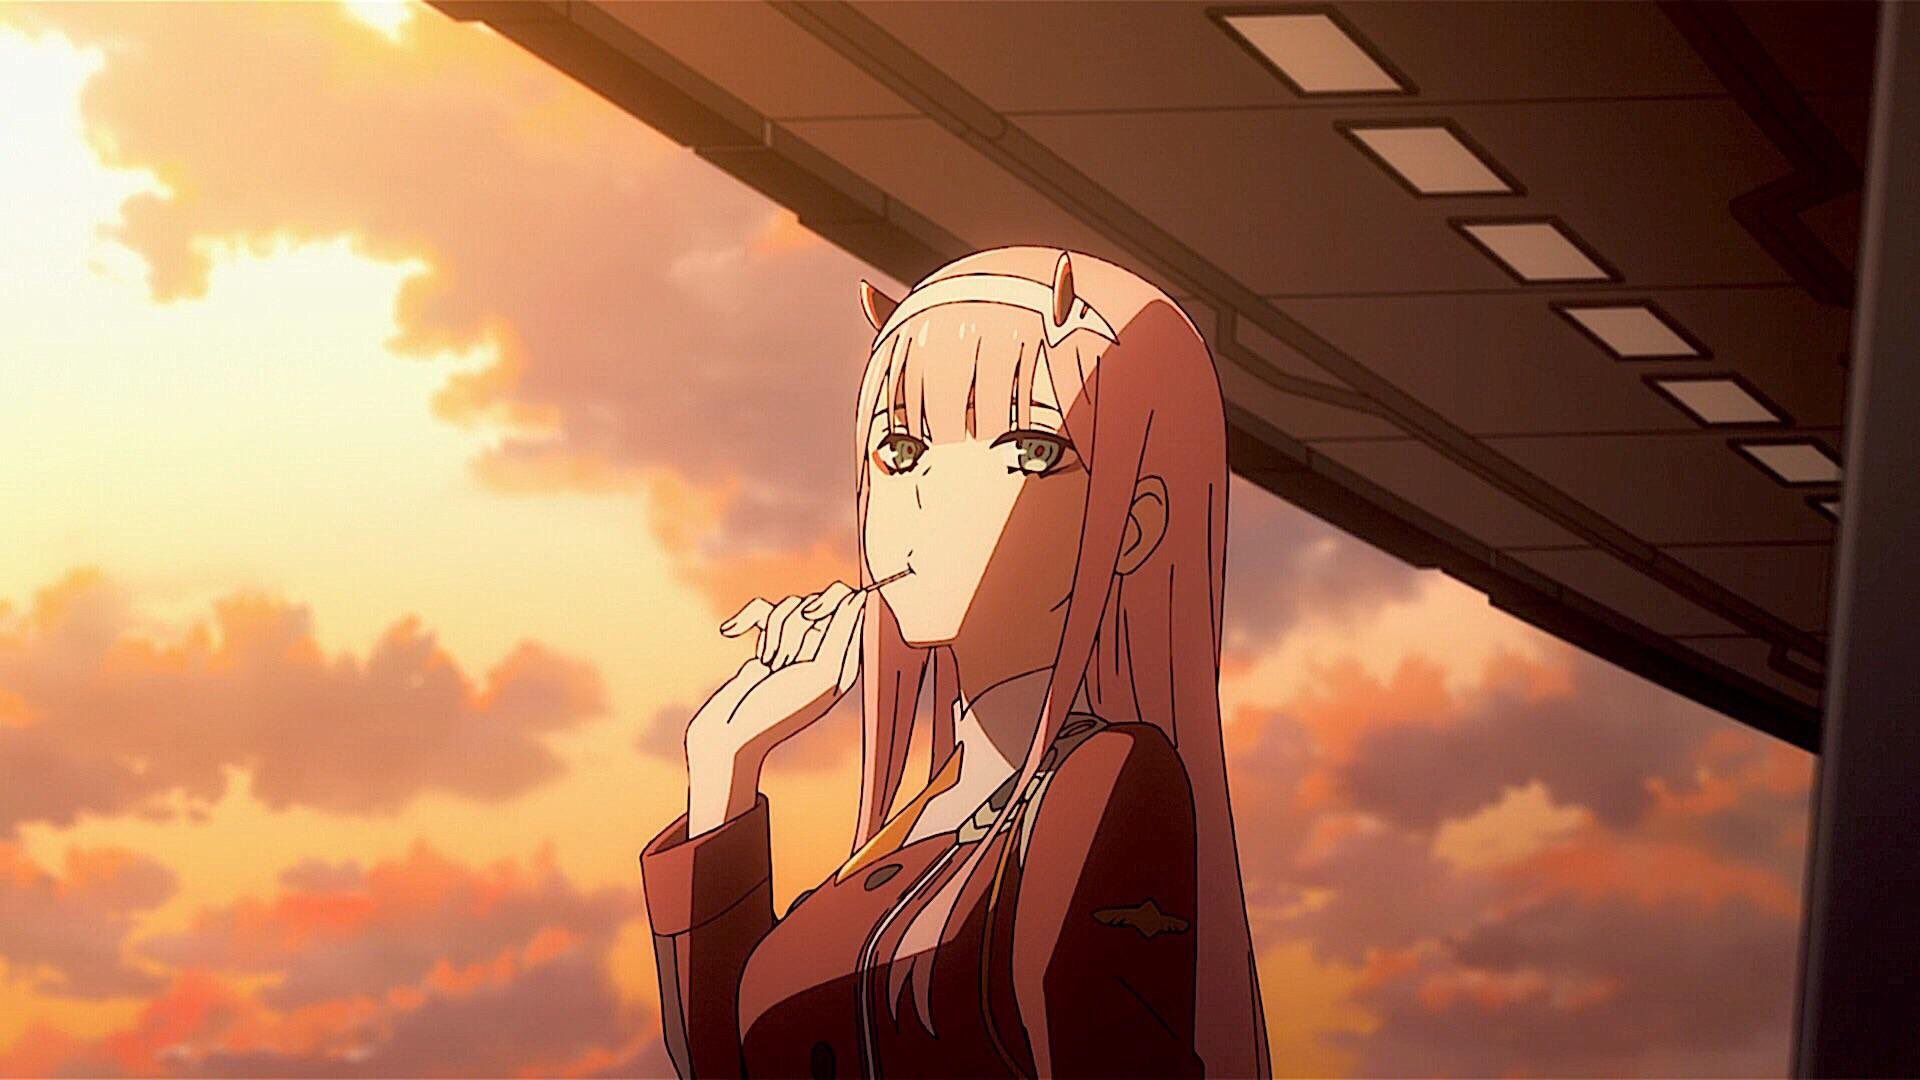 Zero Two. 002 - ──── «↝✧↜» ──── ✦┊Zero Two ✧┊No Lewd Stuff ✦┊Detailed And Literate. ✧┊Crack & Serious Rp. ✦┊Dms Open For Plotting ✧┊Any Ships Are Allowed ──── «↝✧↜» ──── 【#DarlinginthefranXX ┊#zerotwo